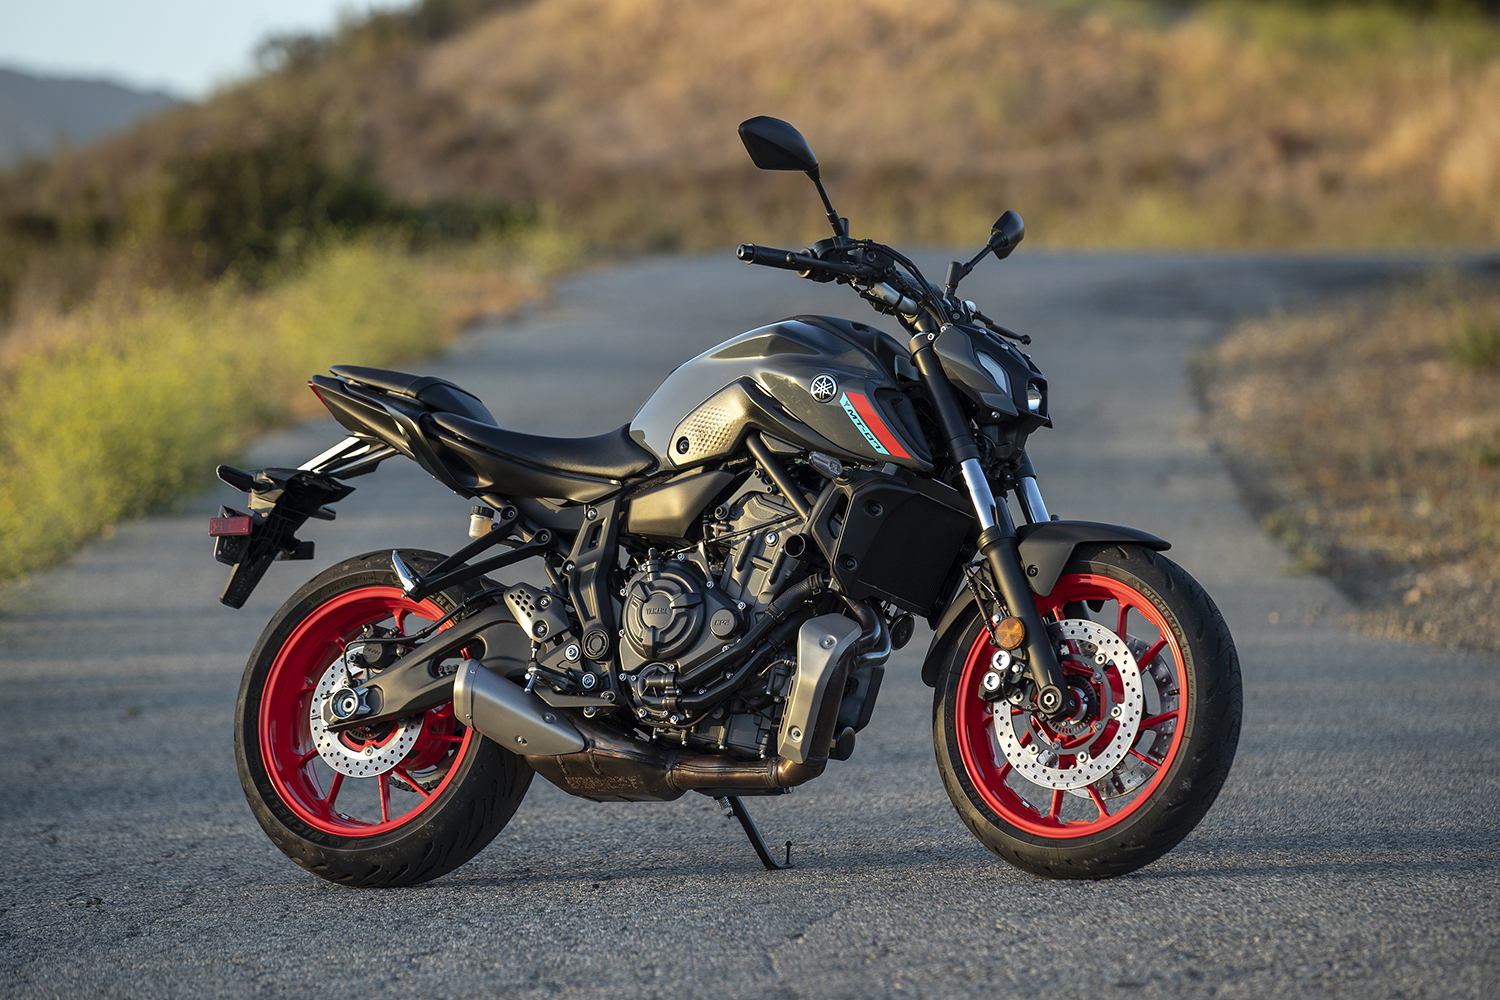 2021 Yamaha MT-07, Road Test Review